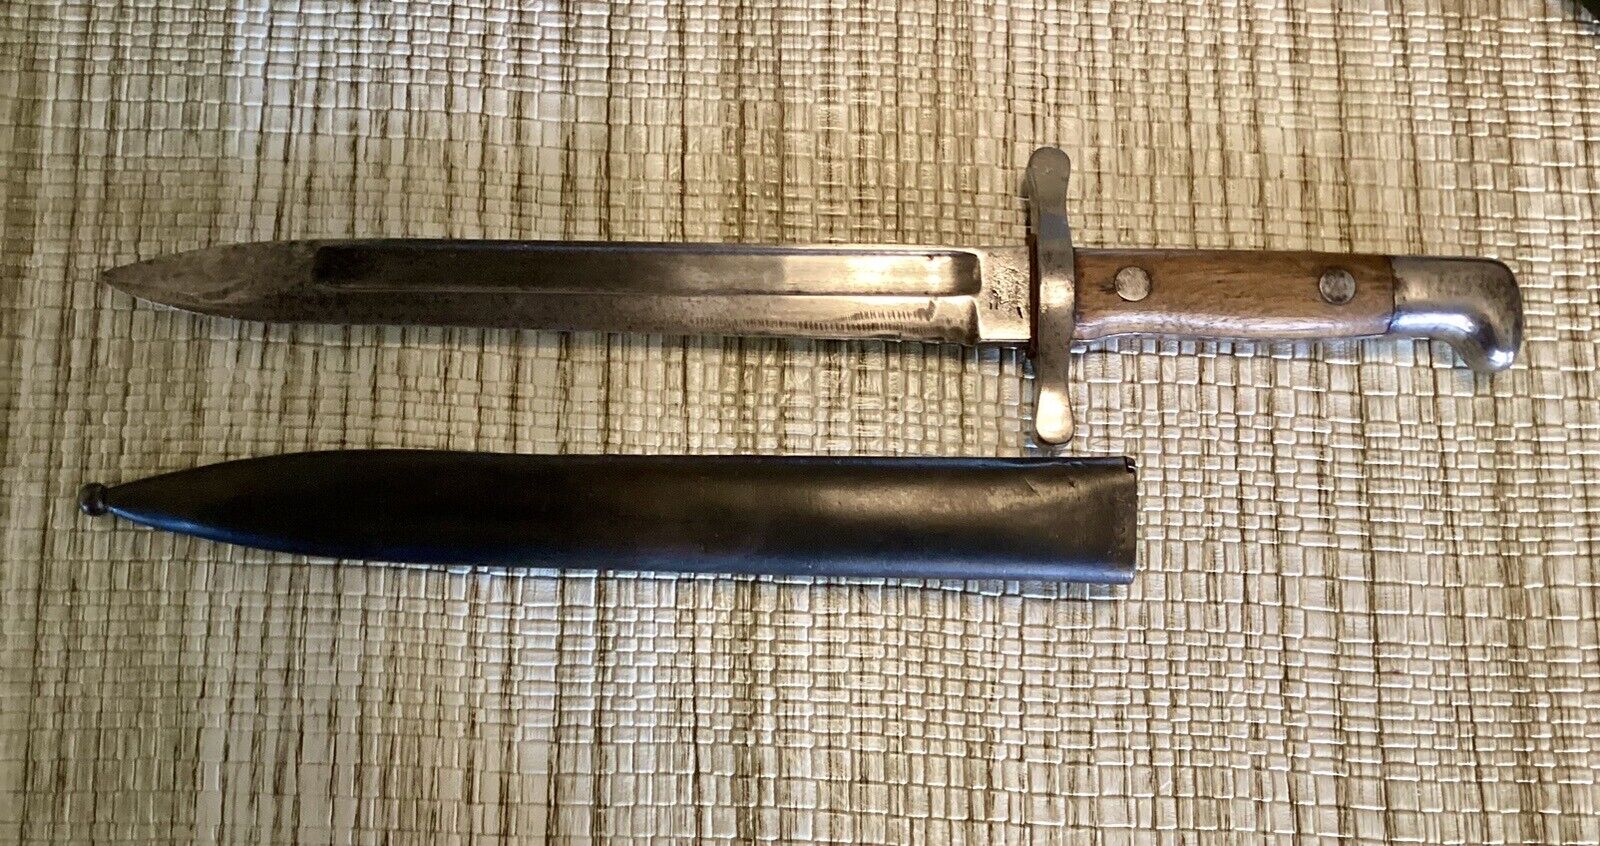 RARE WWI FRENCH ARMY TRENCH KNIFE, MADE BY FRENCH KNIFE MAKER BOURGADE.